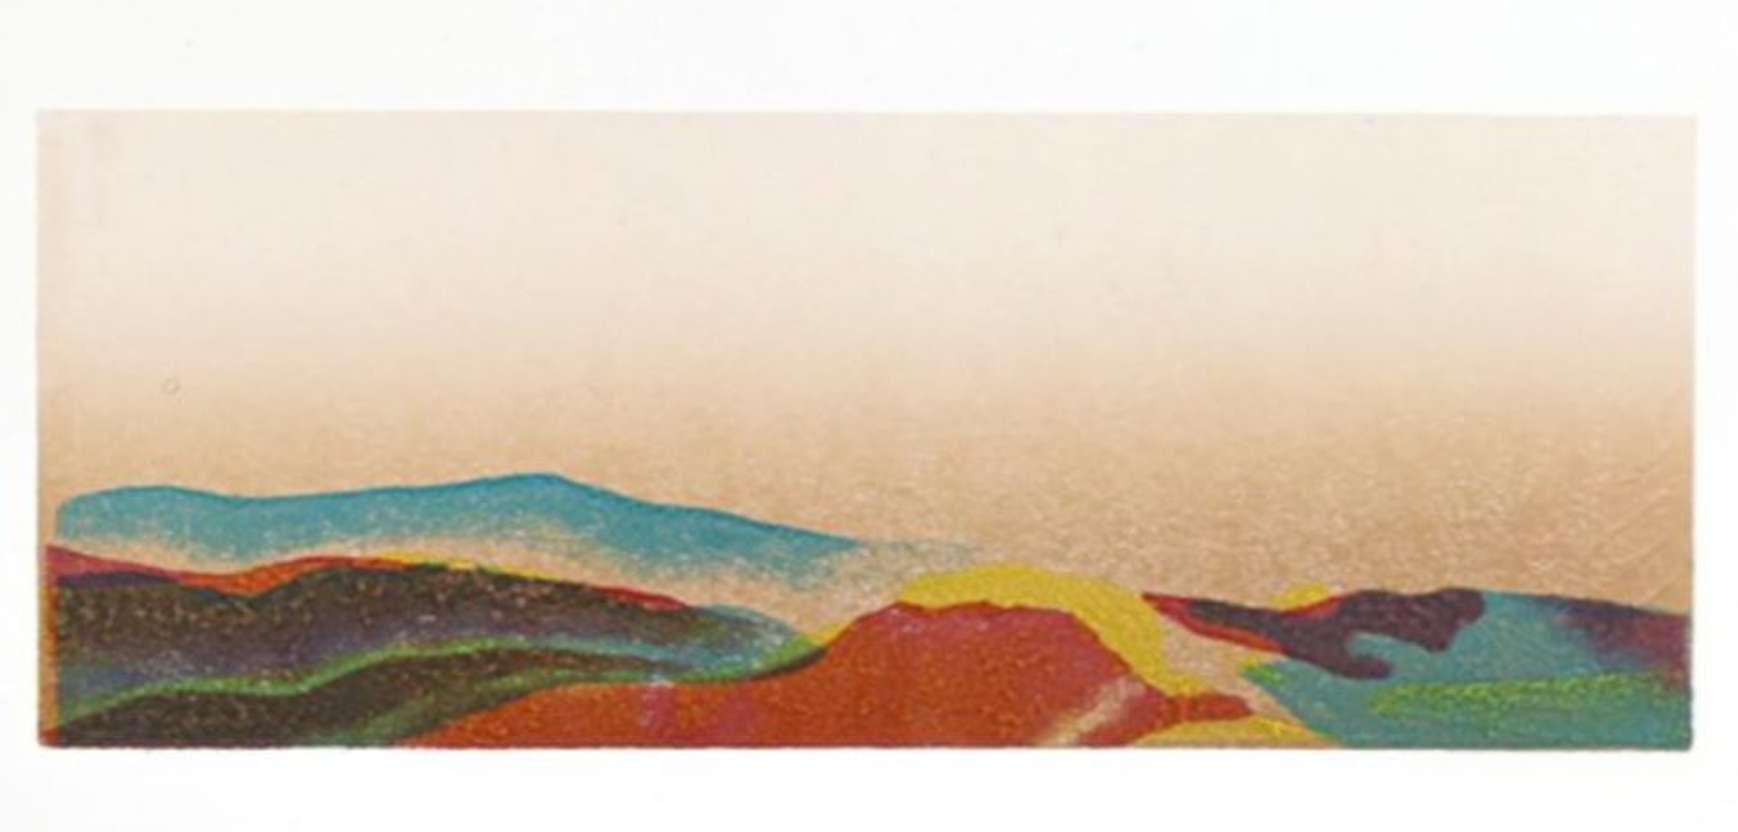 An example of art entered for the Arts Degree Show 2023. It is a sandy-coloured watercolour painting of a mountain range